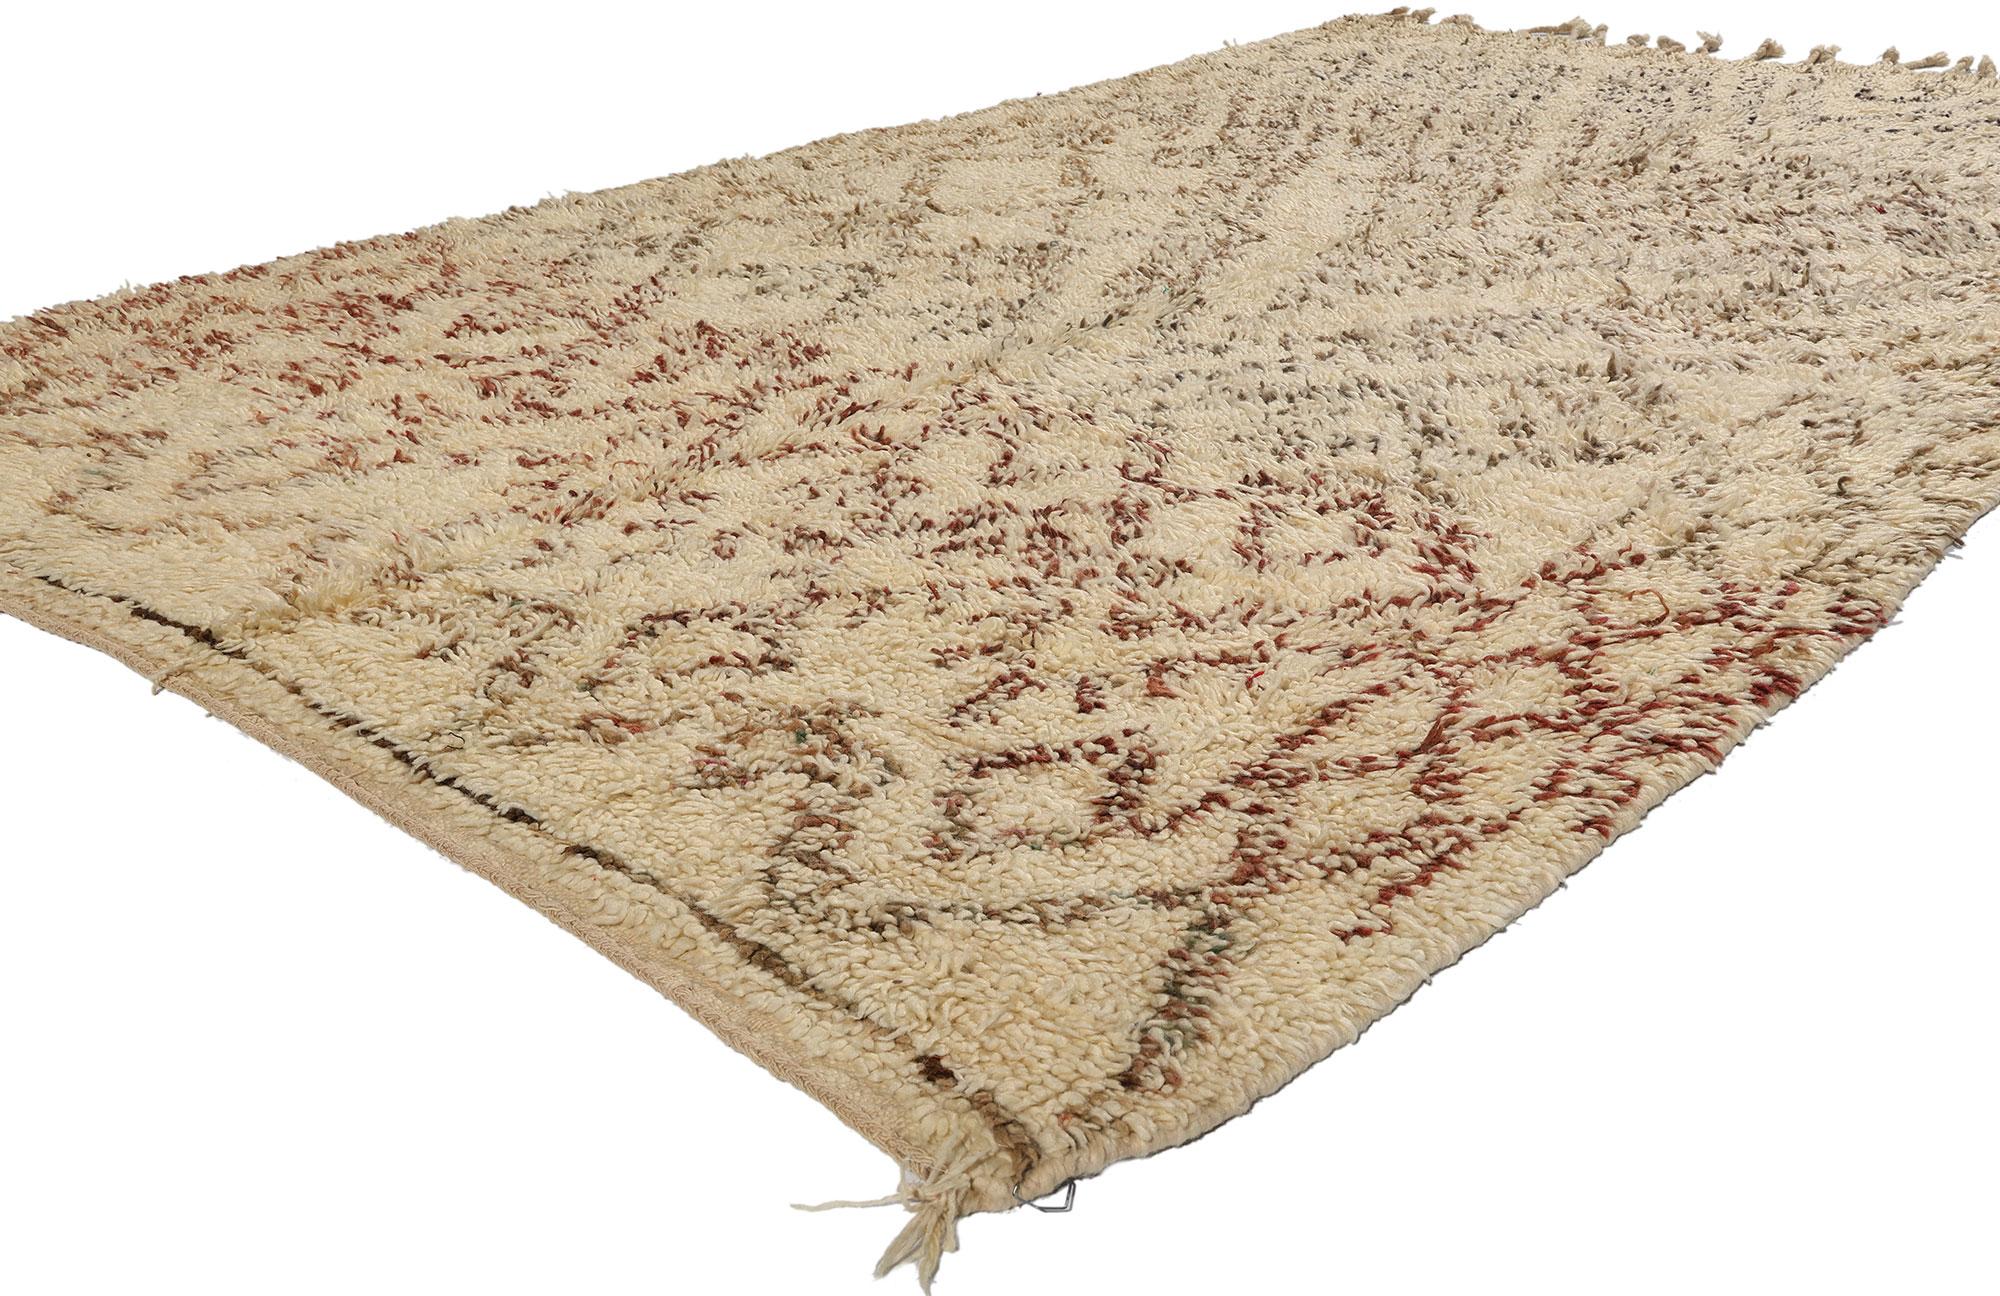 21750 Vintage Neutral Beni MGuild Moroccan Rug, 05'04 x 08'09. Neutral Beni M'Guild Moroccan rugs typically refer to rugs that feature subdued or earthy tones inspired by colors of nature and its landscapes. These rugs often have a more understated